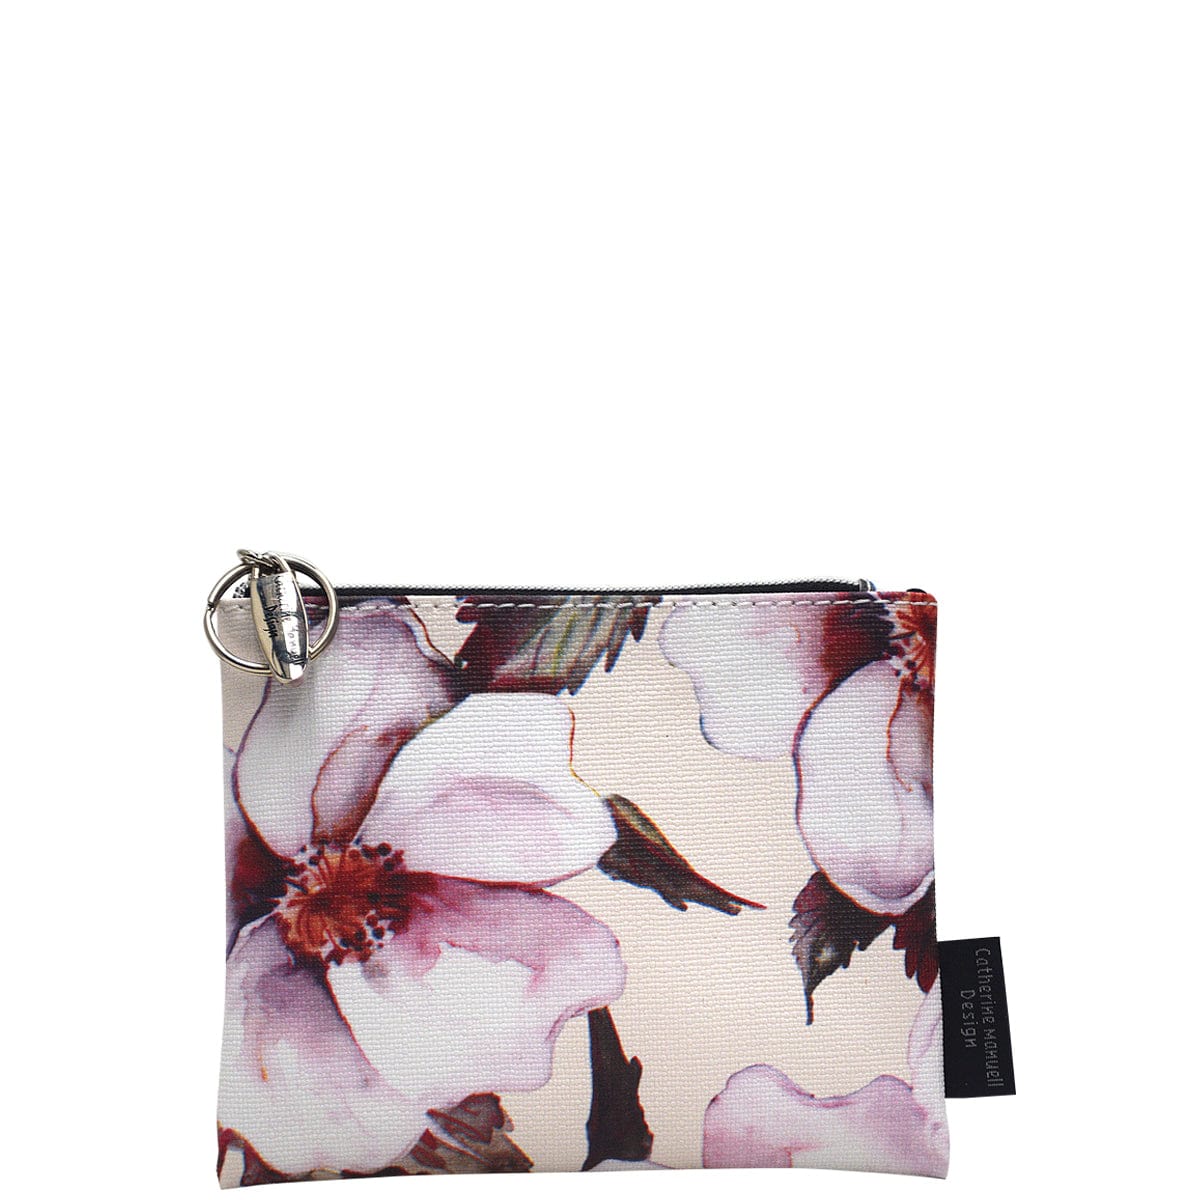 Everyday Purse - Dusty Pink Floral